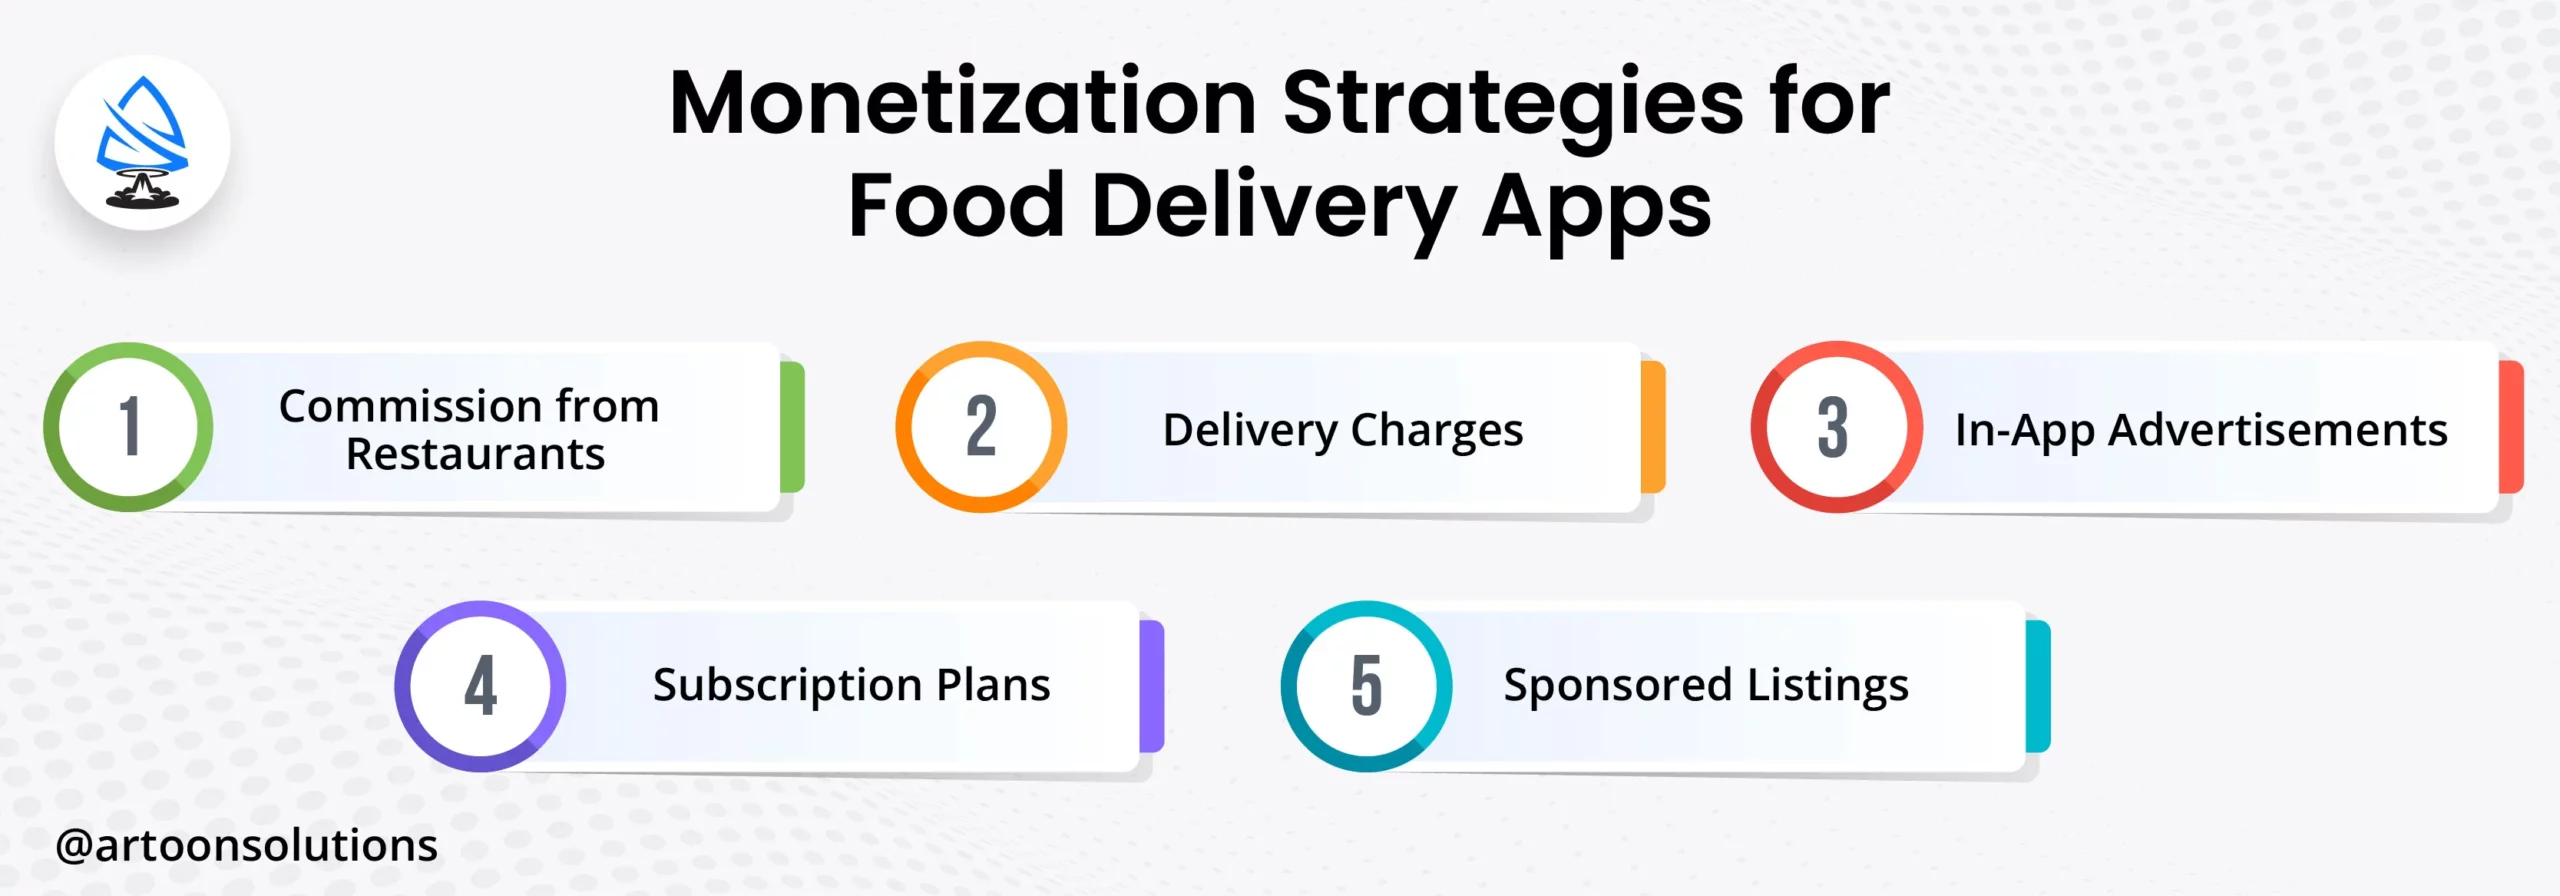 Monetization Strategies for Food Delivery Apps